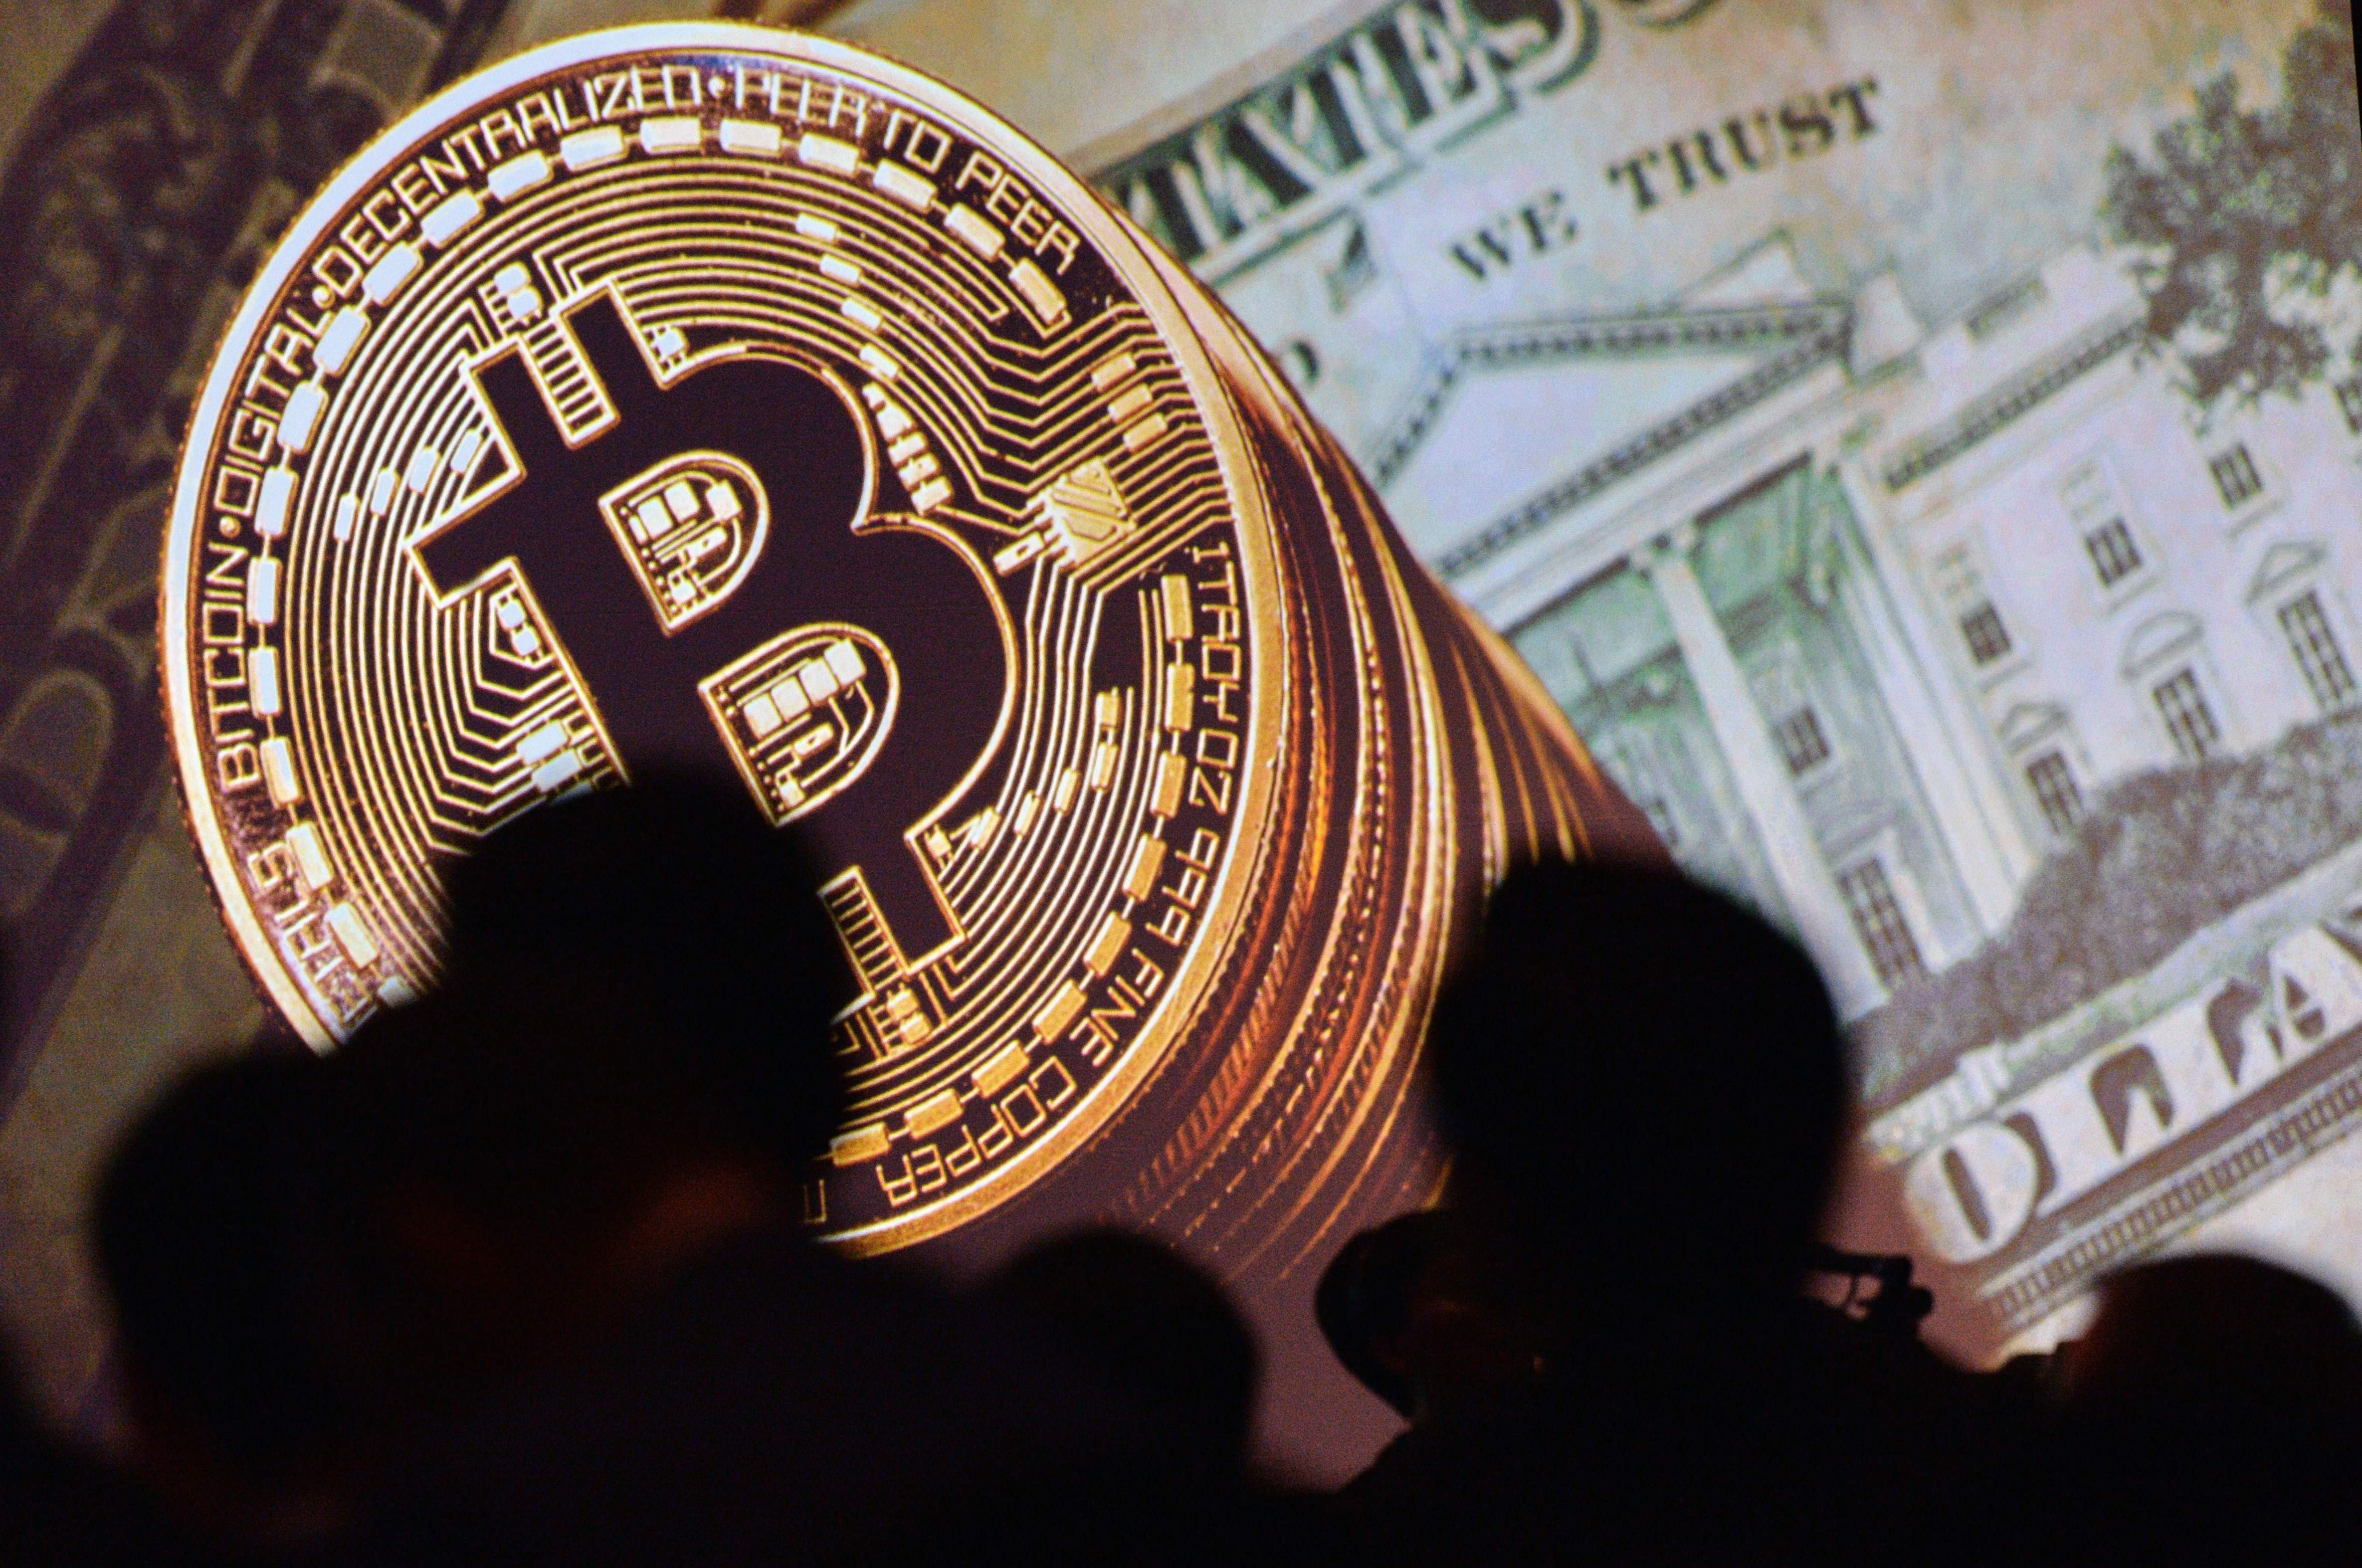 Bitcoin and the US currency are displayed on a screen as delegates listen to a panel during the Interpol World Congress in Singapore on July 4. The price of bitcoin versus the US dollar has gone up over 330 times. Photo: AFP